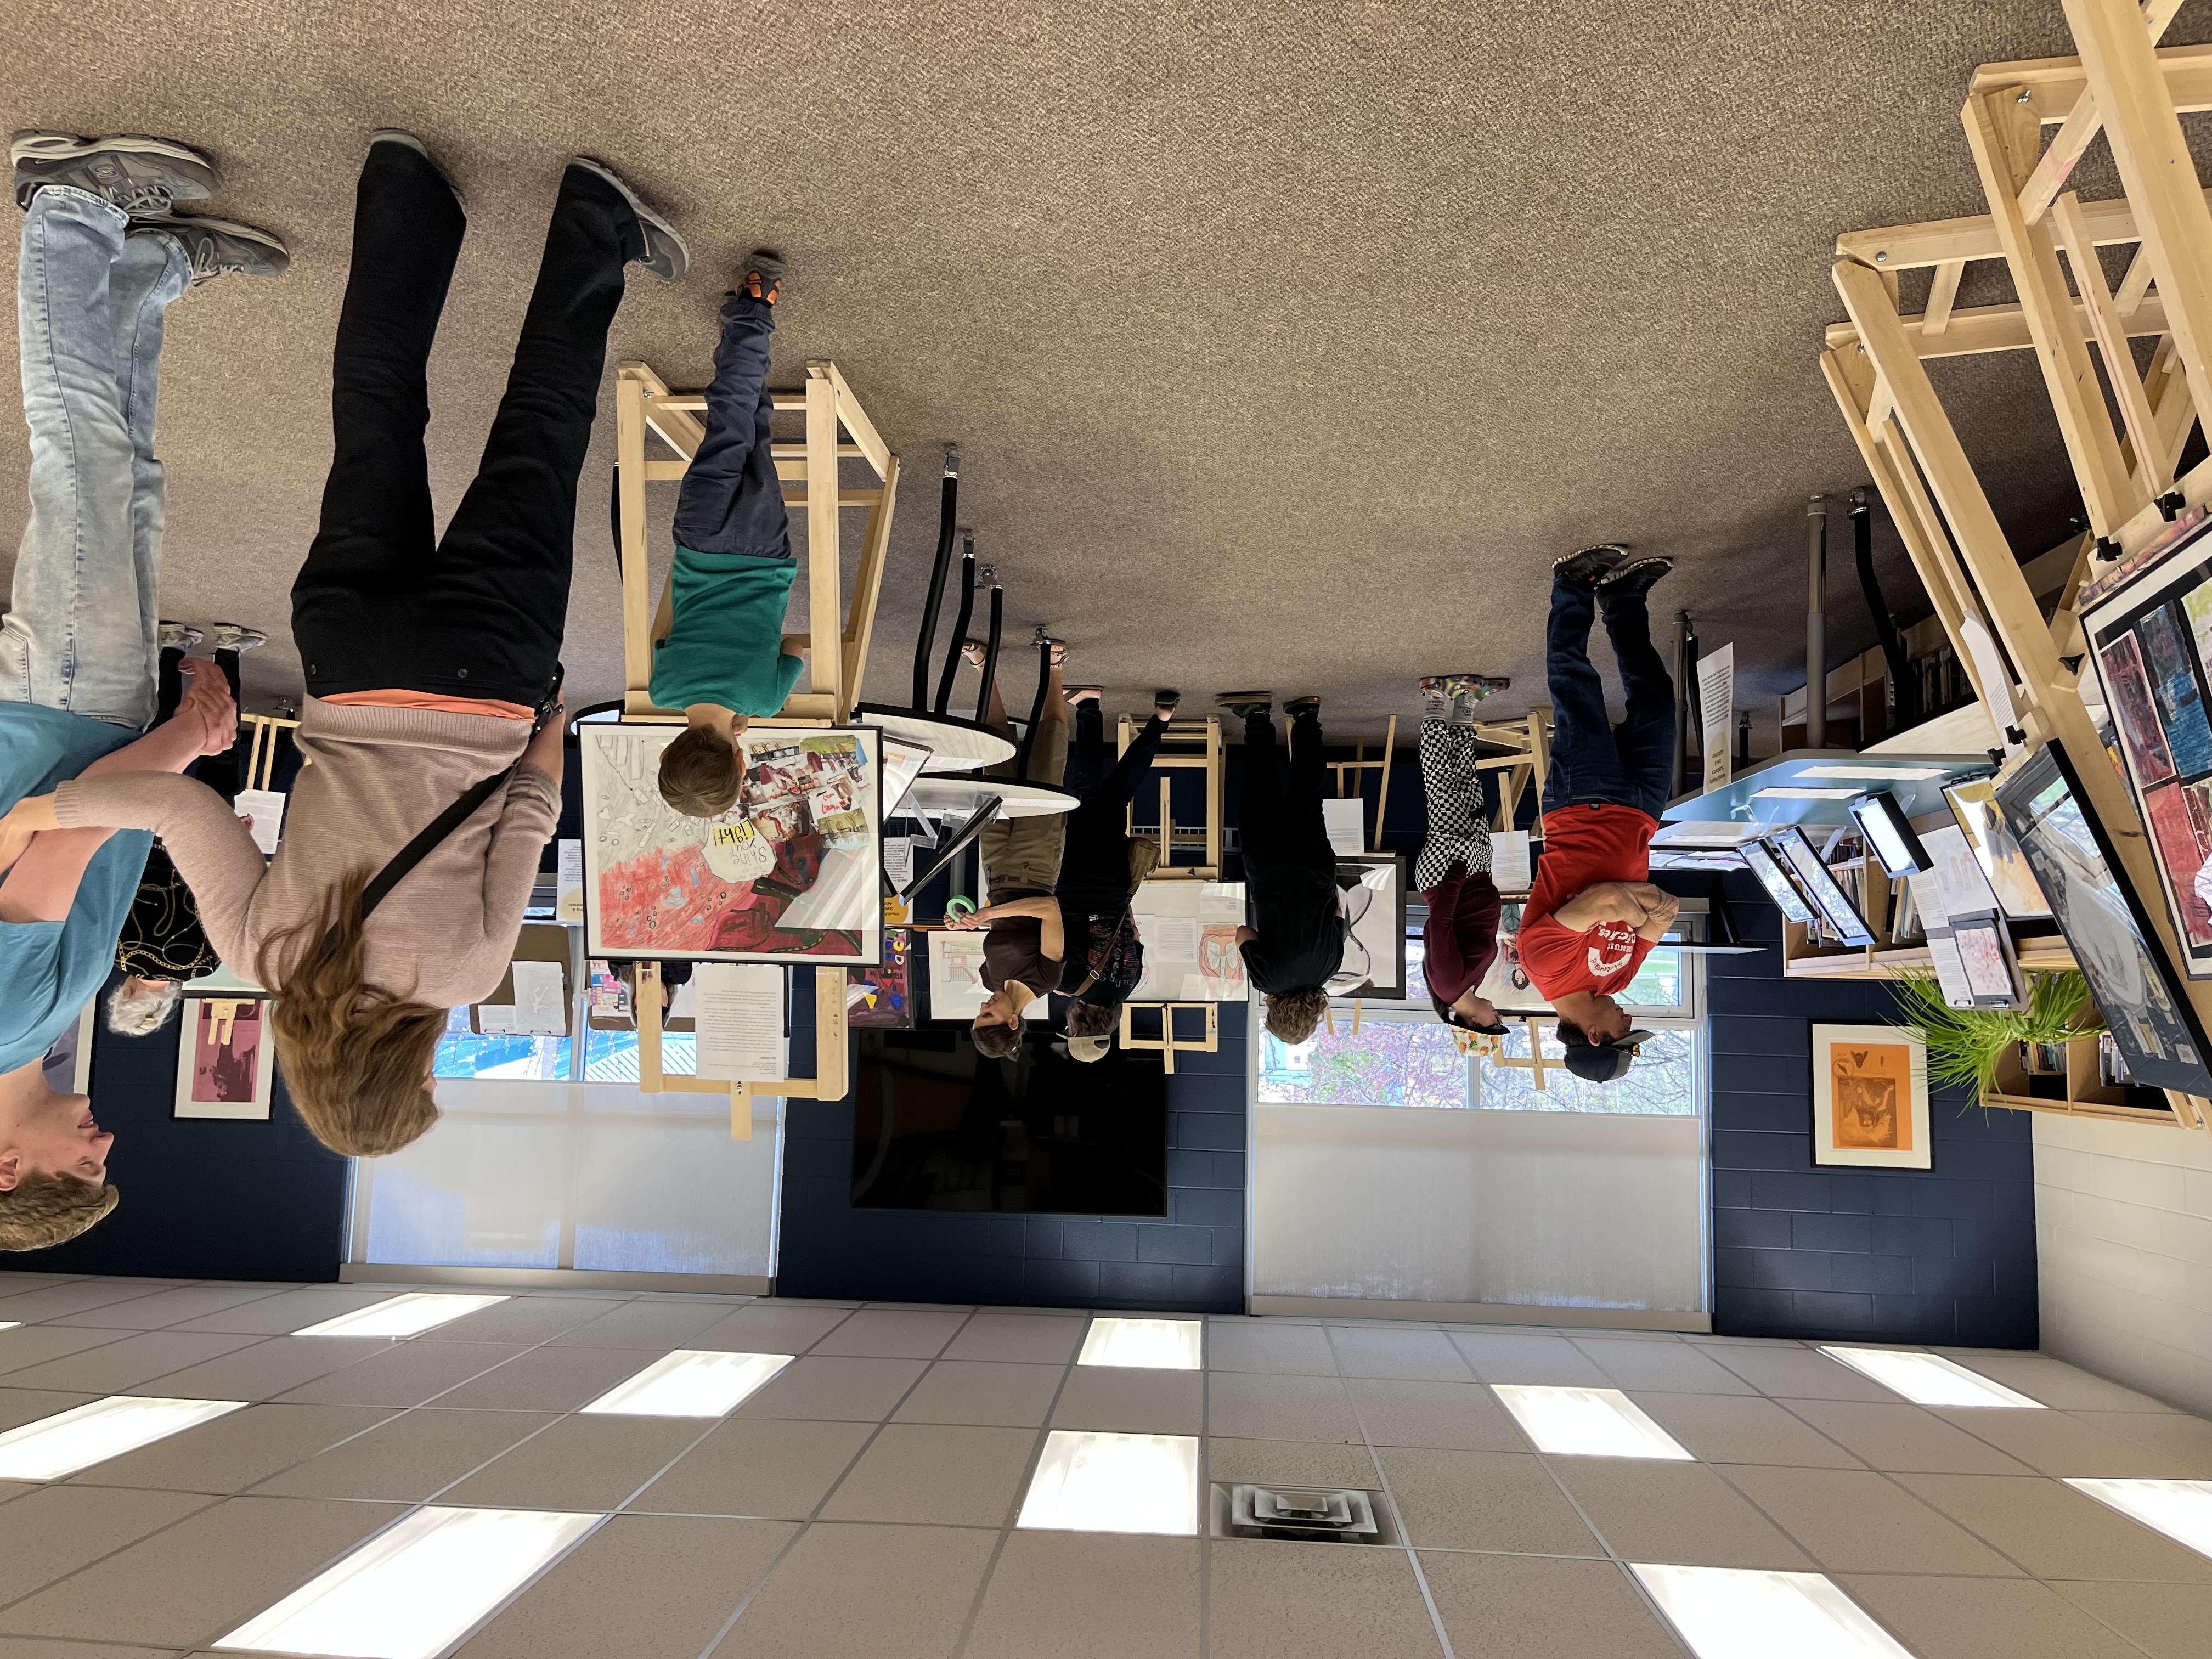 A view of the CSWB Youth Art Exhibition held at HHSS on May 10. Artwork arranged on easels can be seen in foreground and background. People are looking at the art around the room.